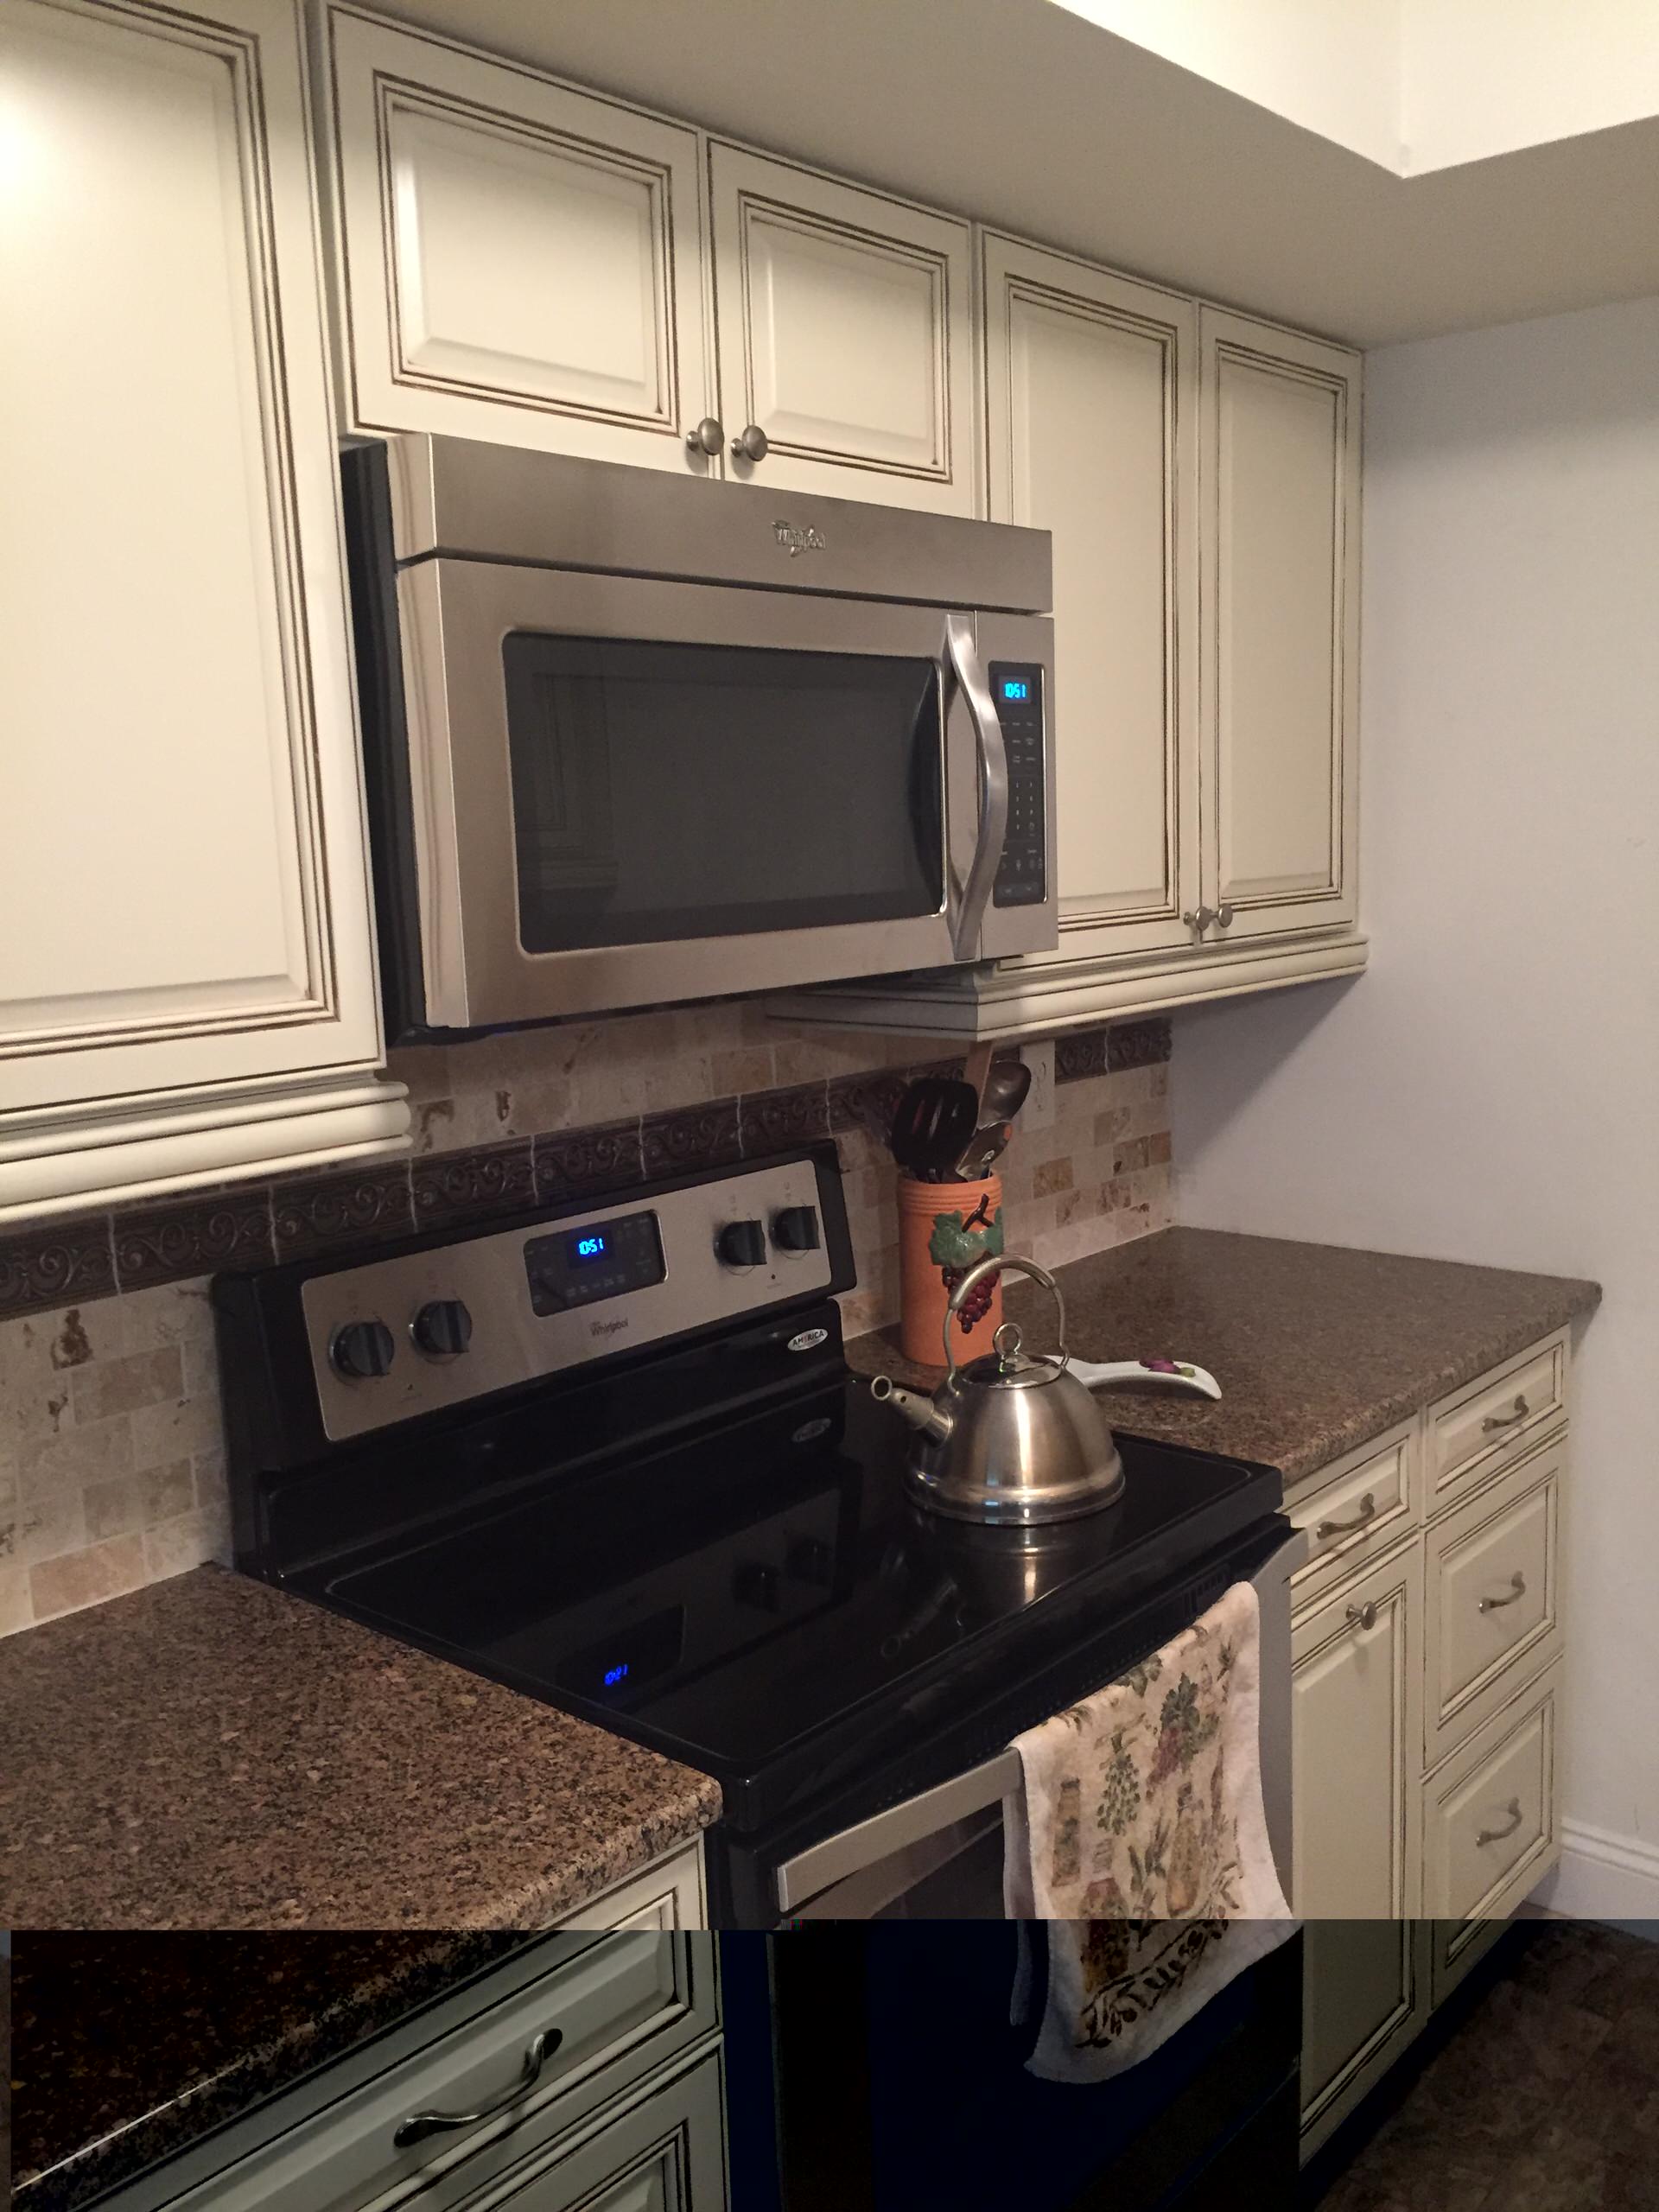 https://st.hzcdn.com/simgs/pictures/kitchens/allen-roth-cabinetry-and-quartz-countertops-lowe-s-of-maple-shade-img~9ca172600a92c24c_14-1677-1-e8c3885.jpg